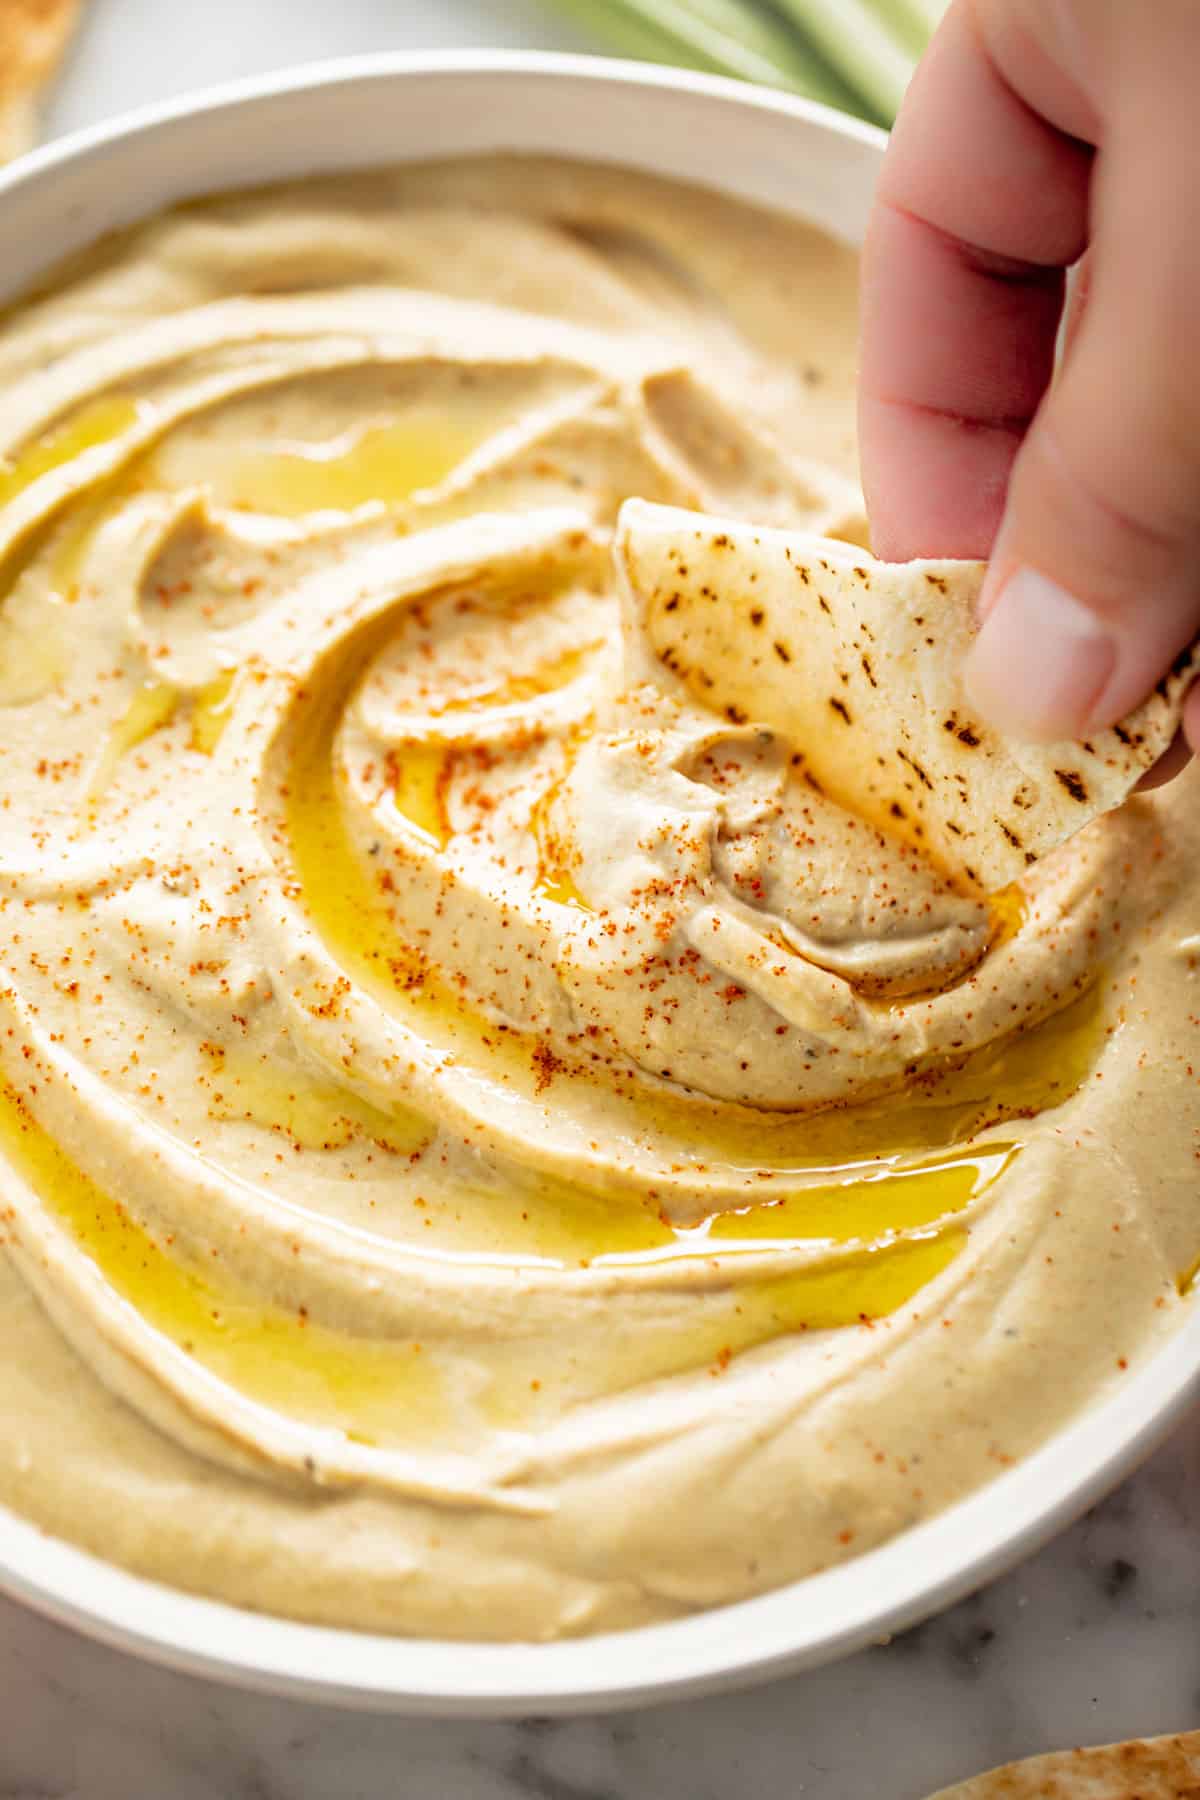 A side view image of a piece of pita bread dipped into Hummus served in a white bowl, drizzled with olive oil and topped with a sprinkle of paprika | cafedelites.com